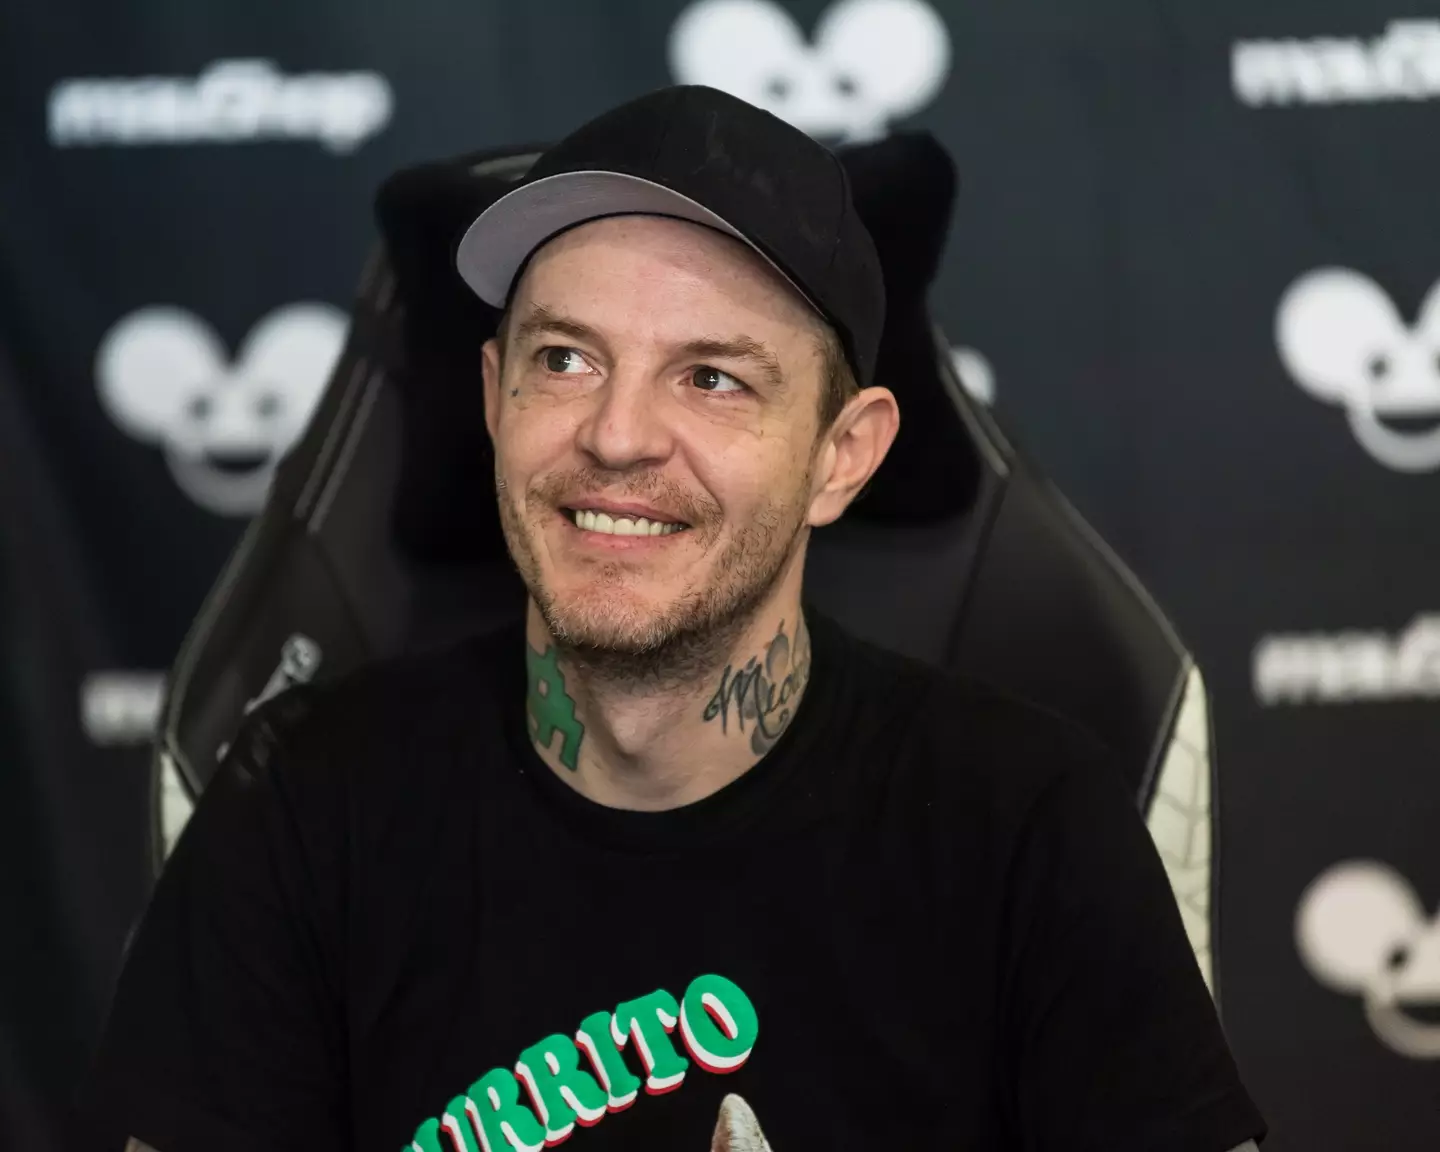 Deadmau5 is a world renowned DJ and music producer.